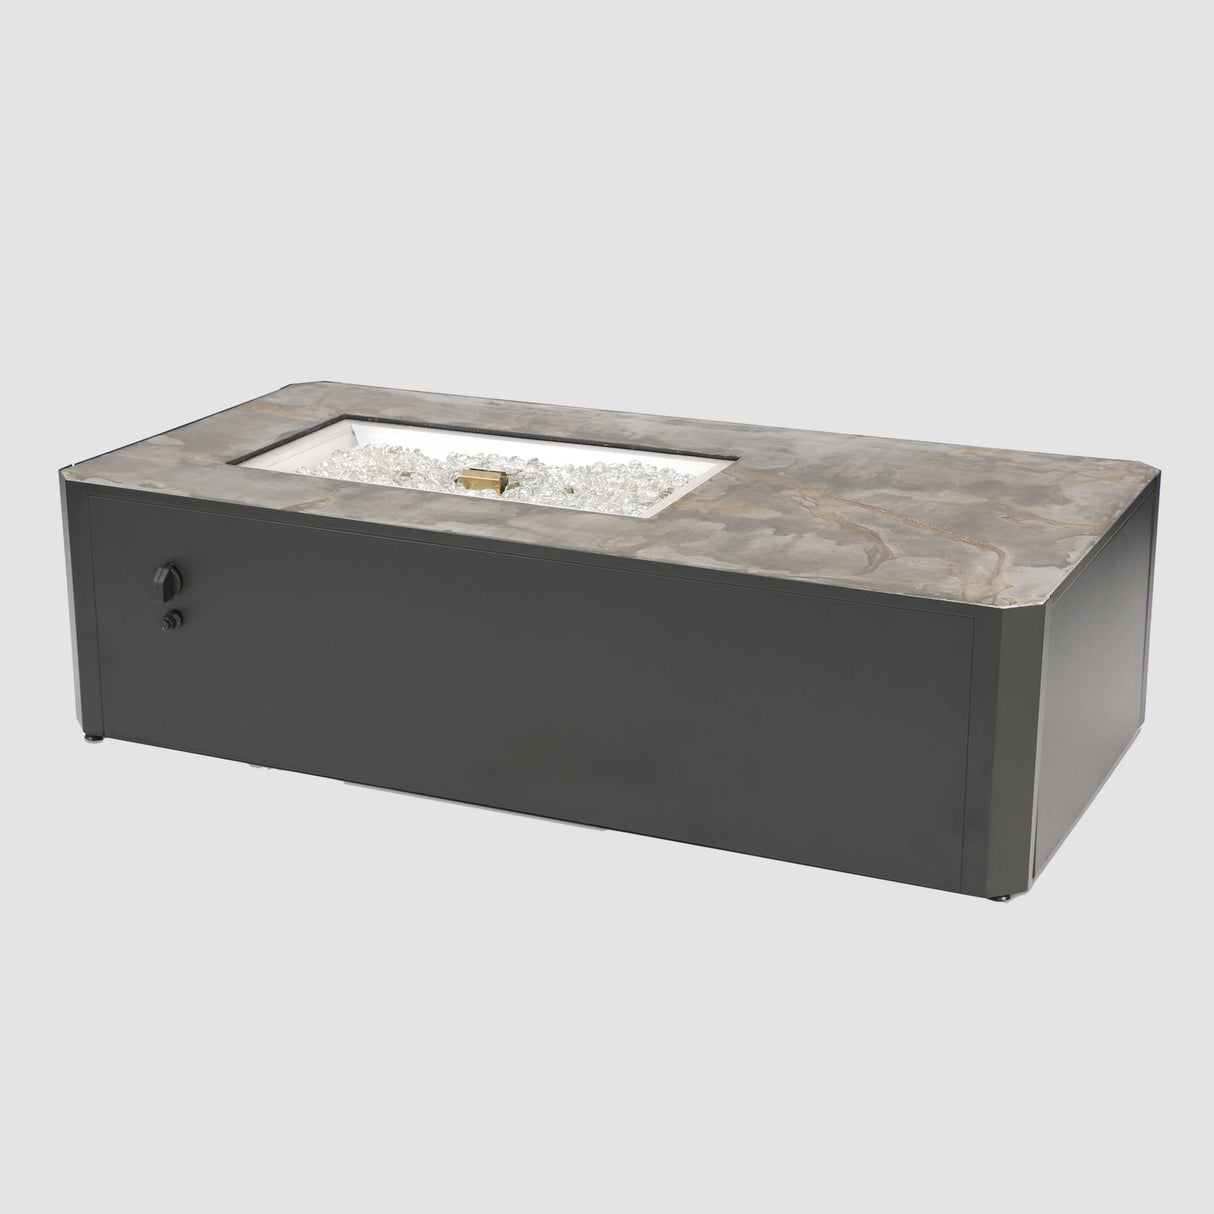 The Kinney Rectangular Gas Fire Pit Table with fire media in its burner on a grey background